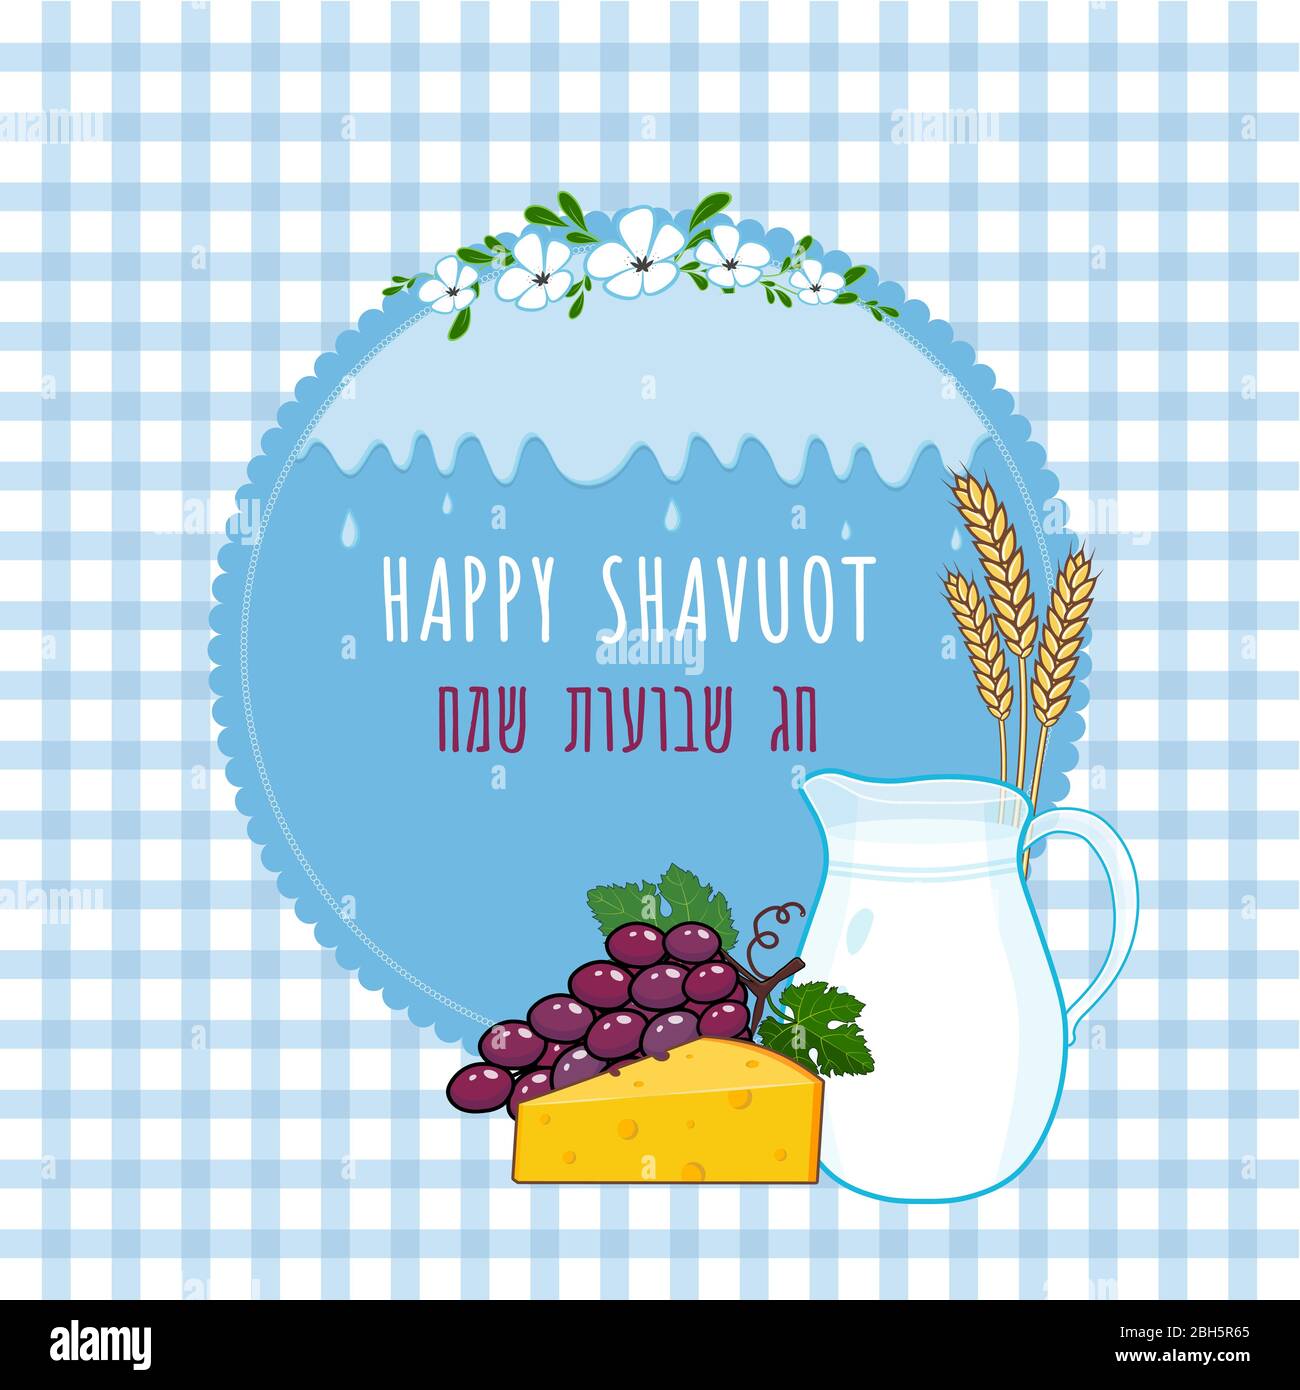 Shavuot Jewish holiday frame banner with milk jug, cheese, grapes, wheat Stock Vector